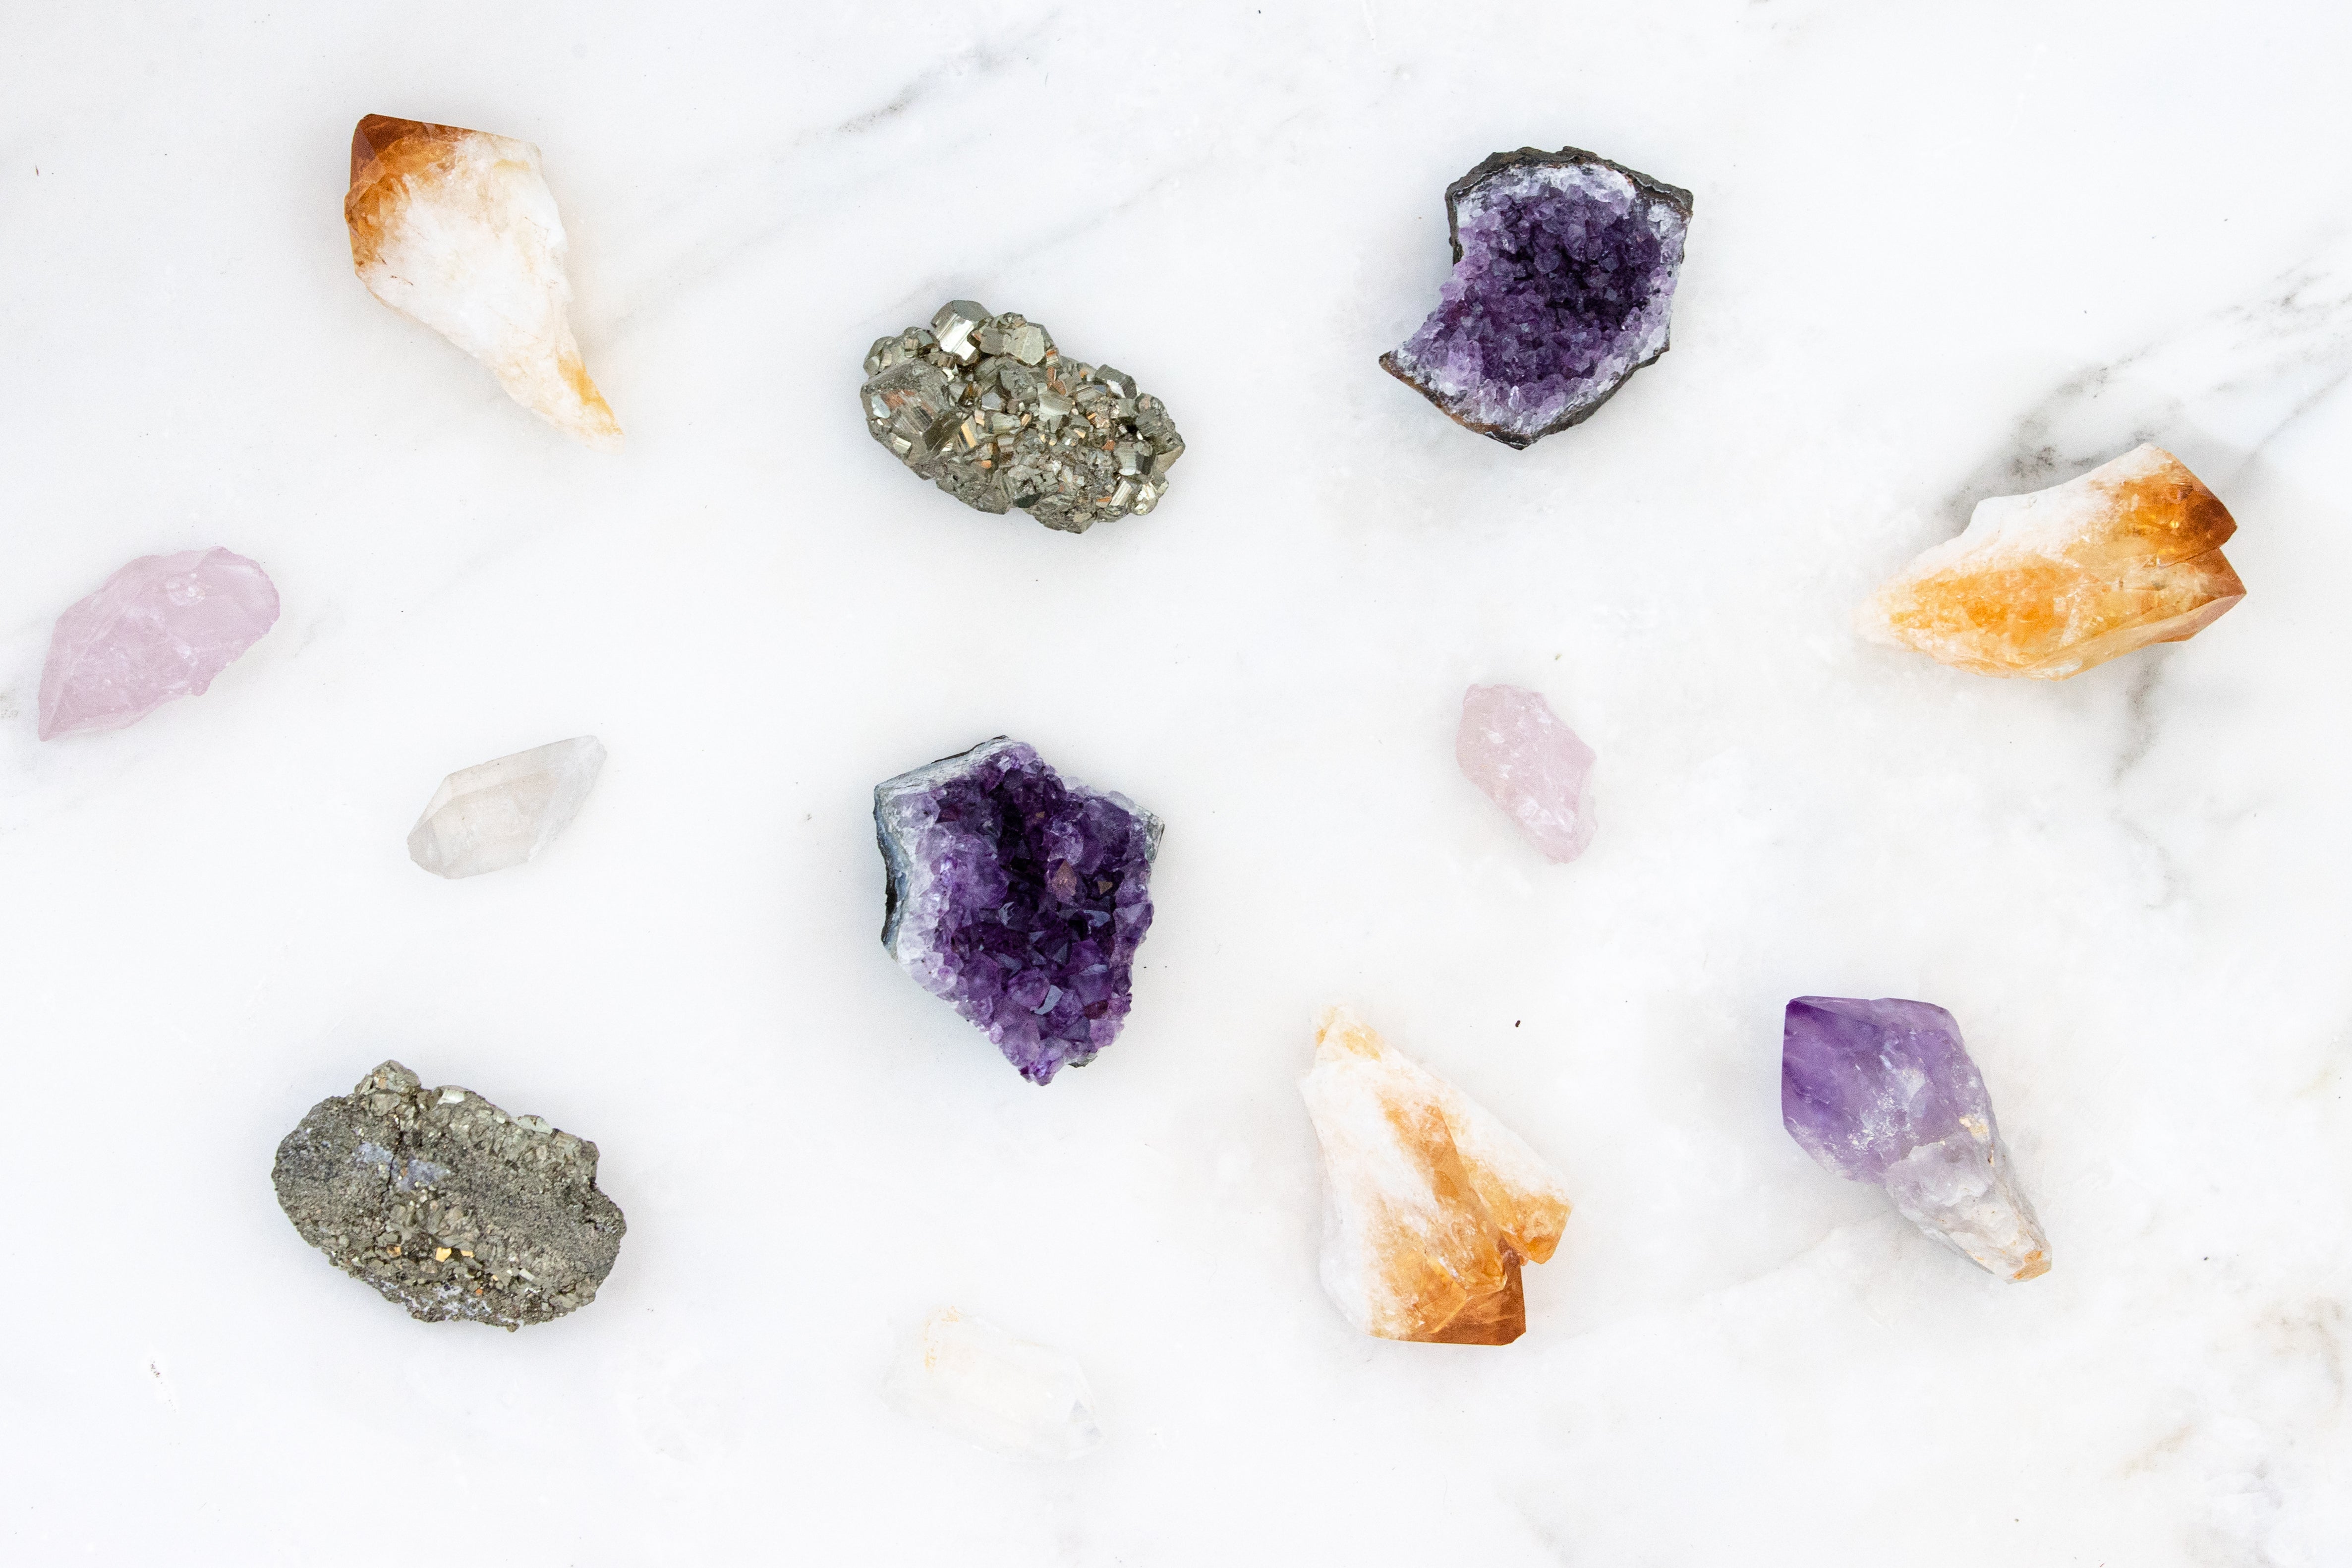 The Beginner's Guide to All Things Crystals